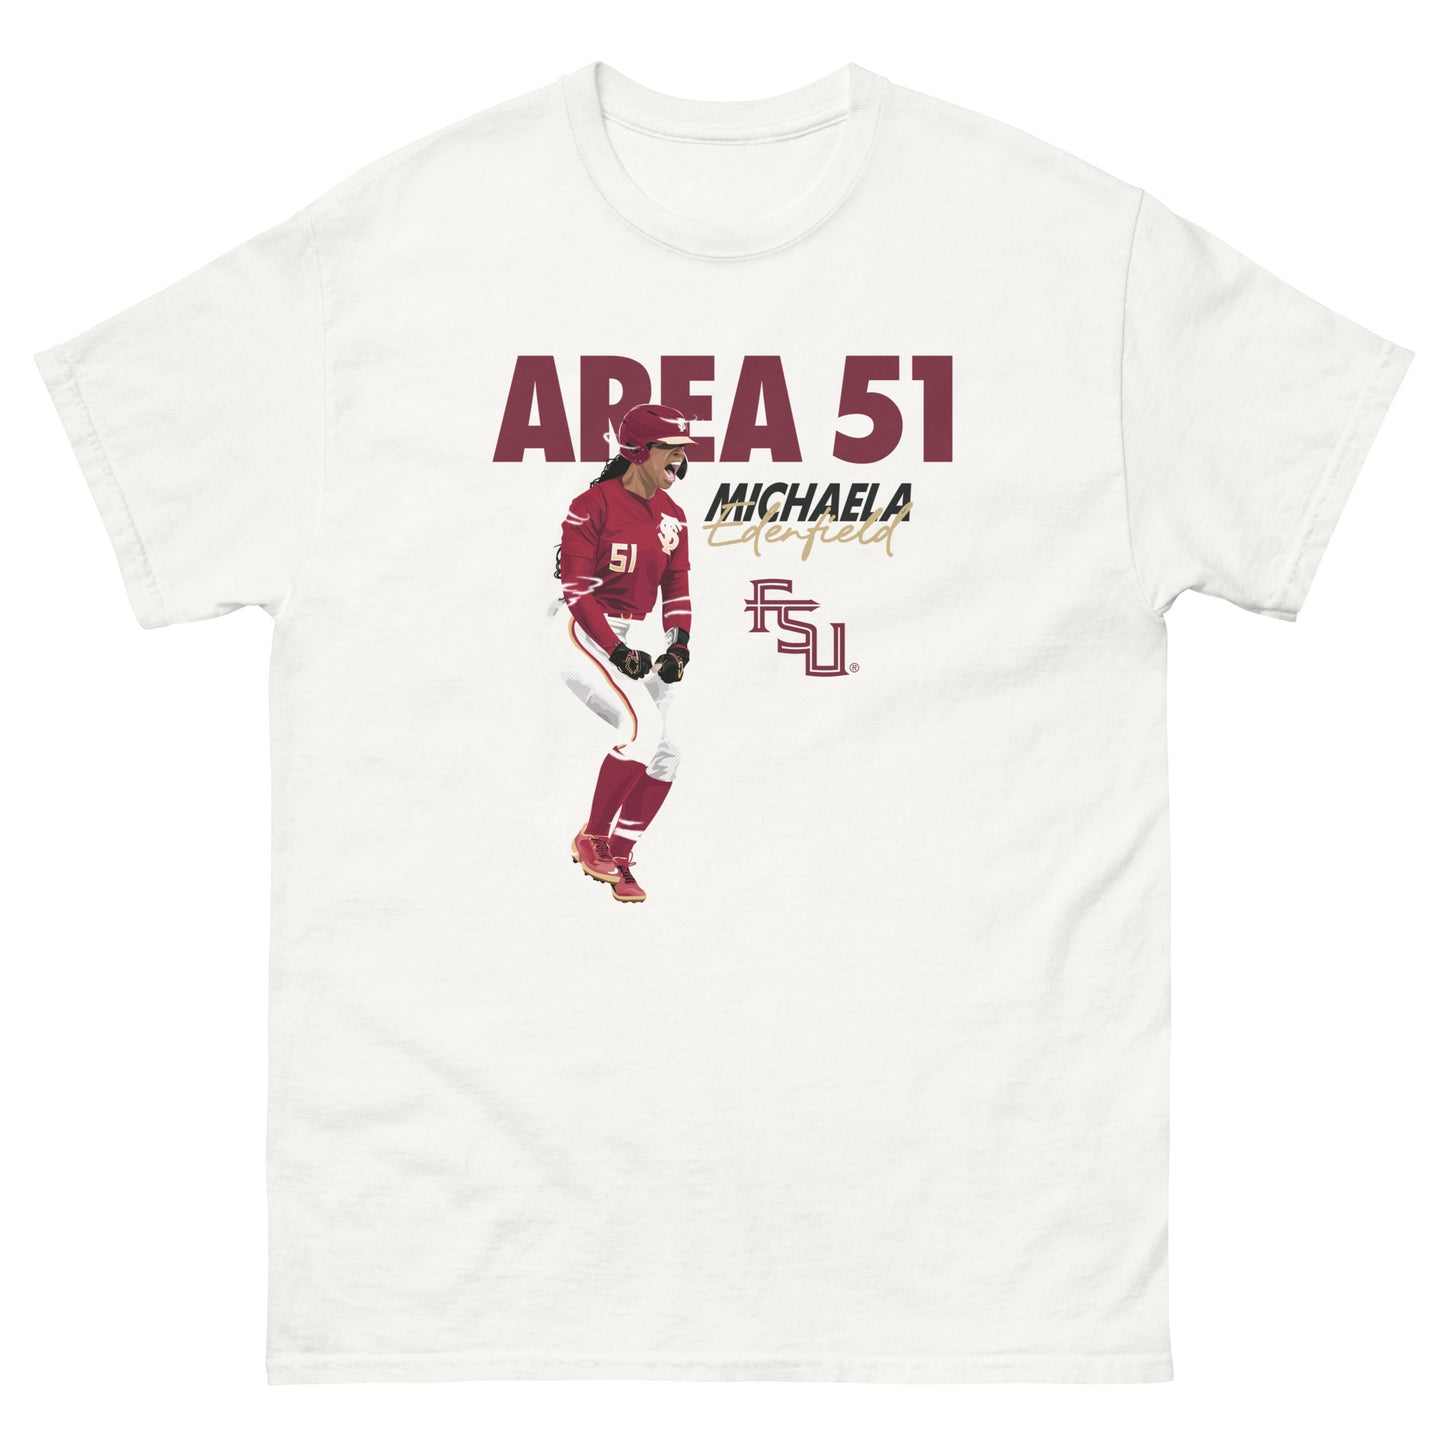 LIMITED RELEASE: Michaela Edenfield - Area 51 T-Shirt